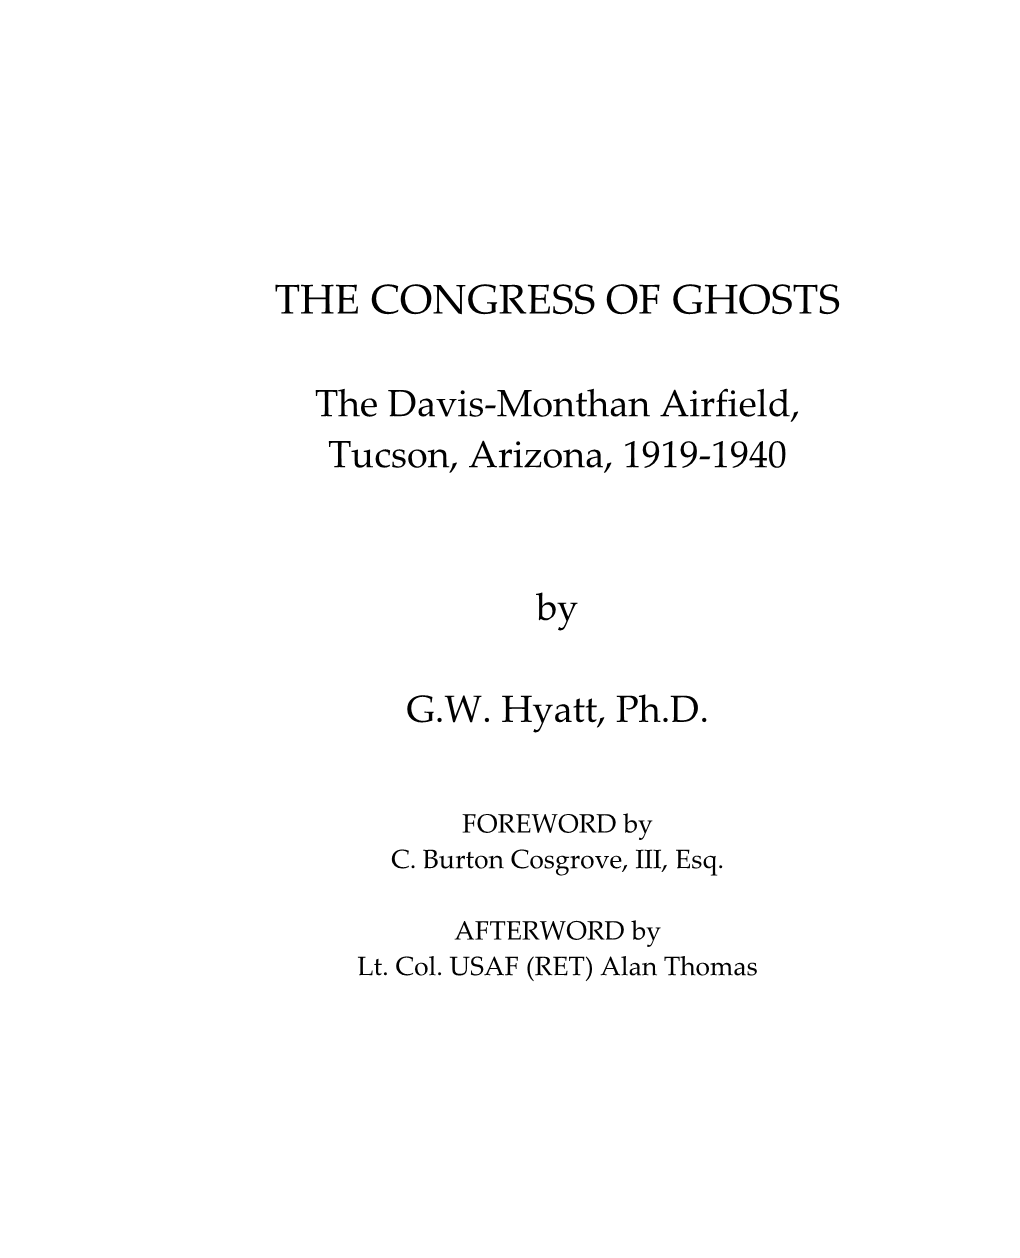 The Congress of Ghosts